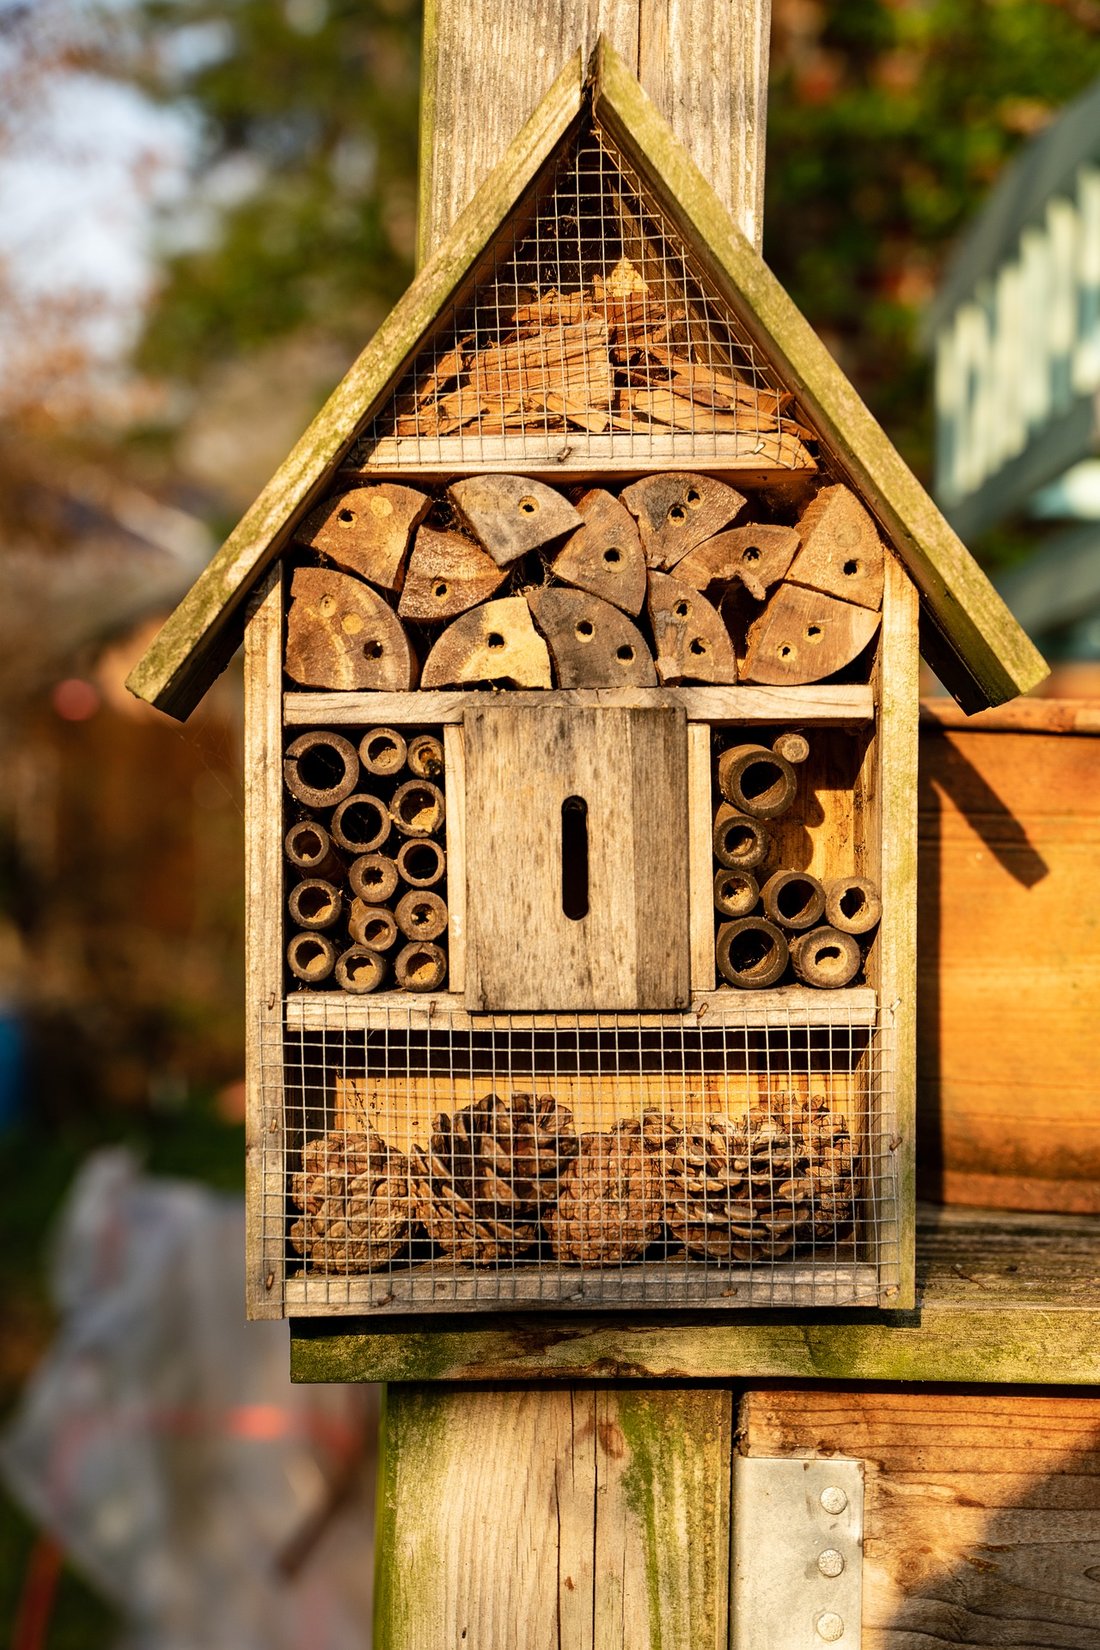 insect-hotel-4110513_1920